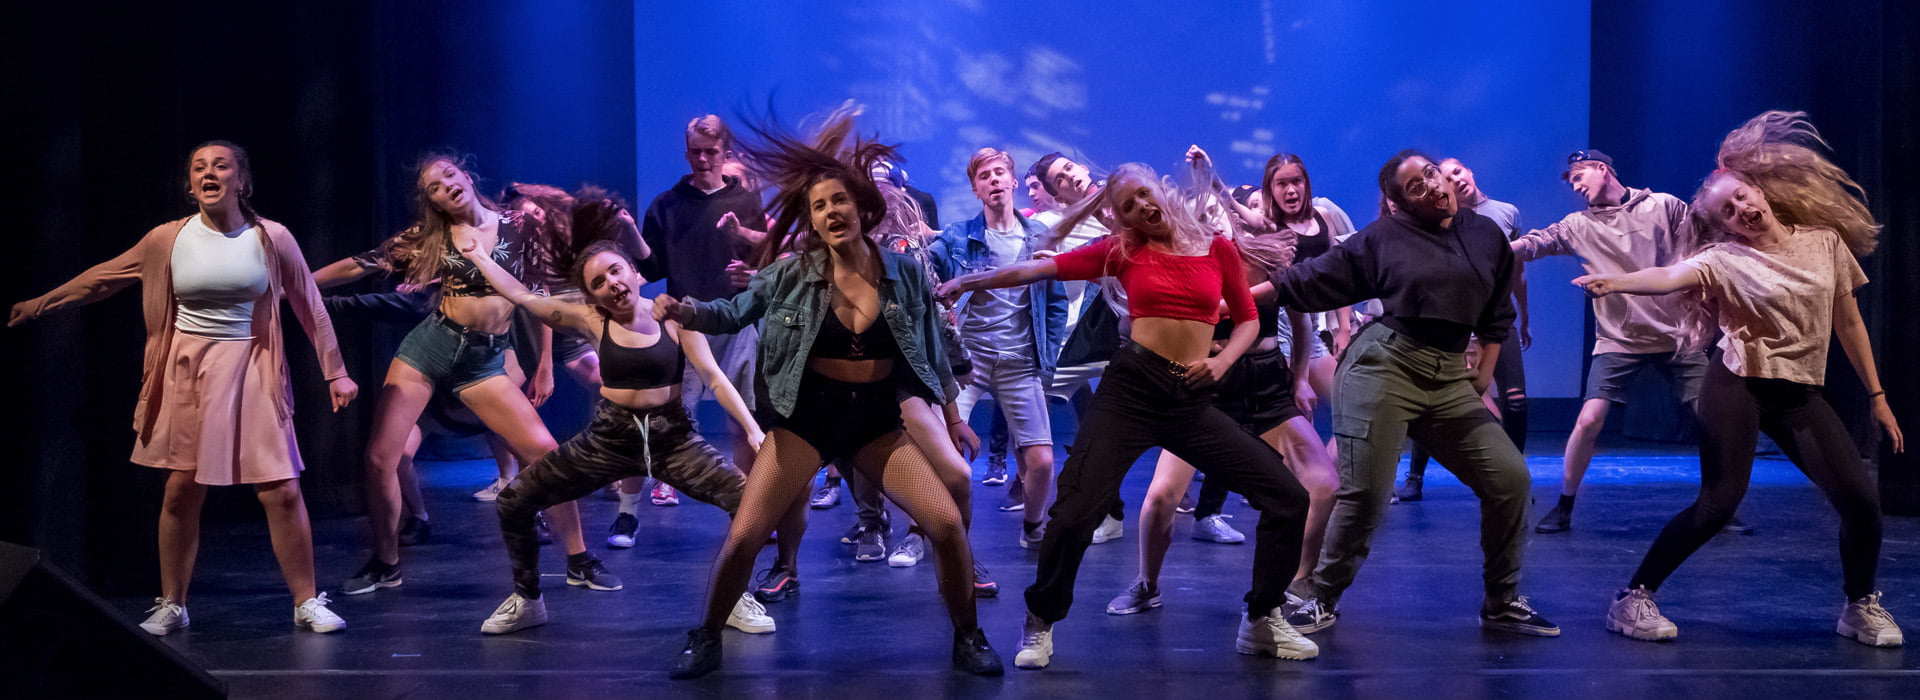 teens performing a musical theatre sing and dance routine